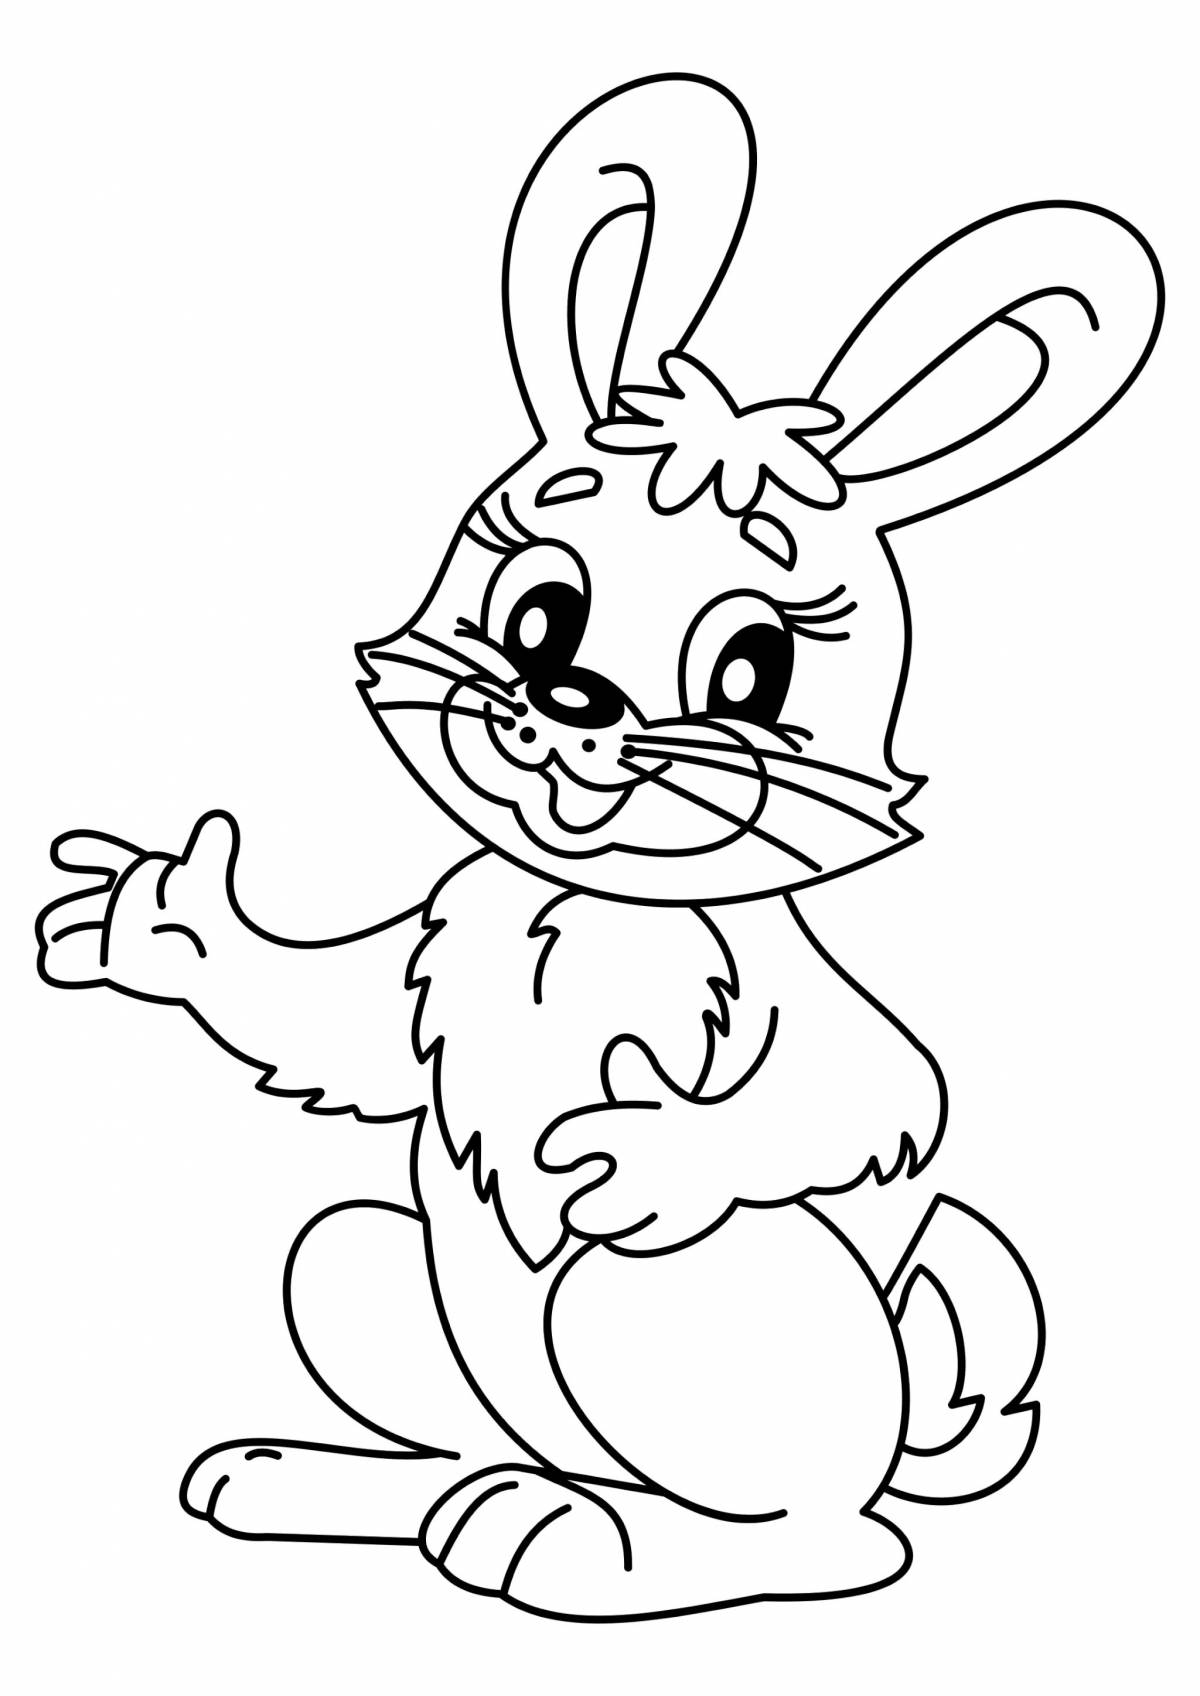 Colorful crazy hare coloring pages for kids